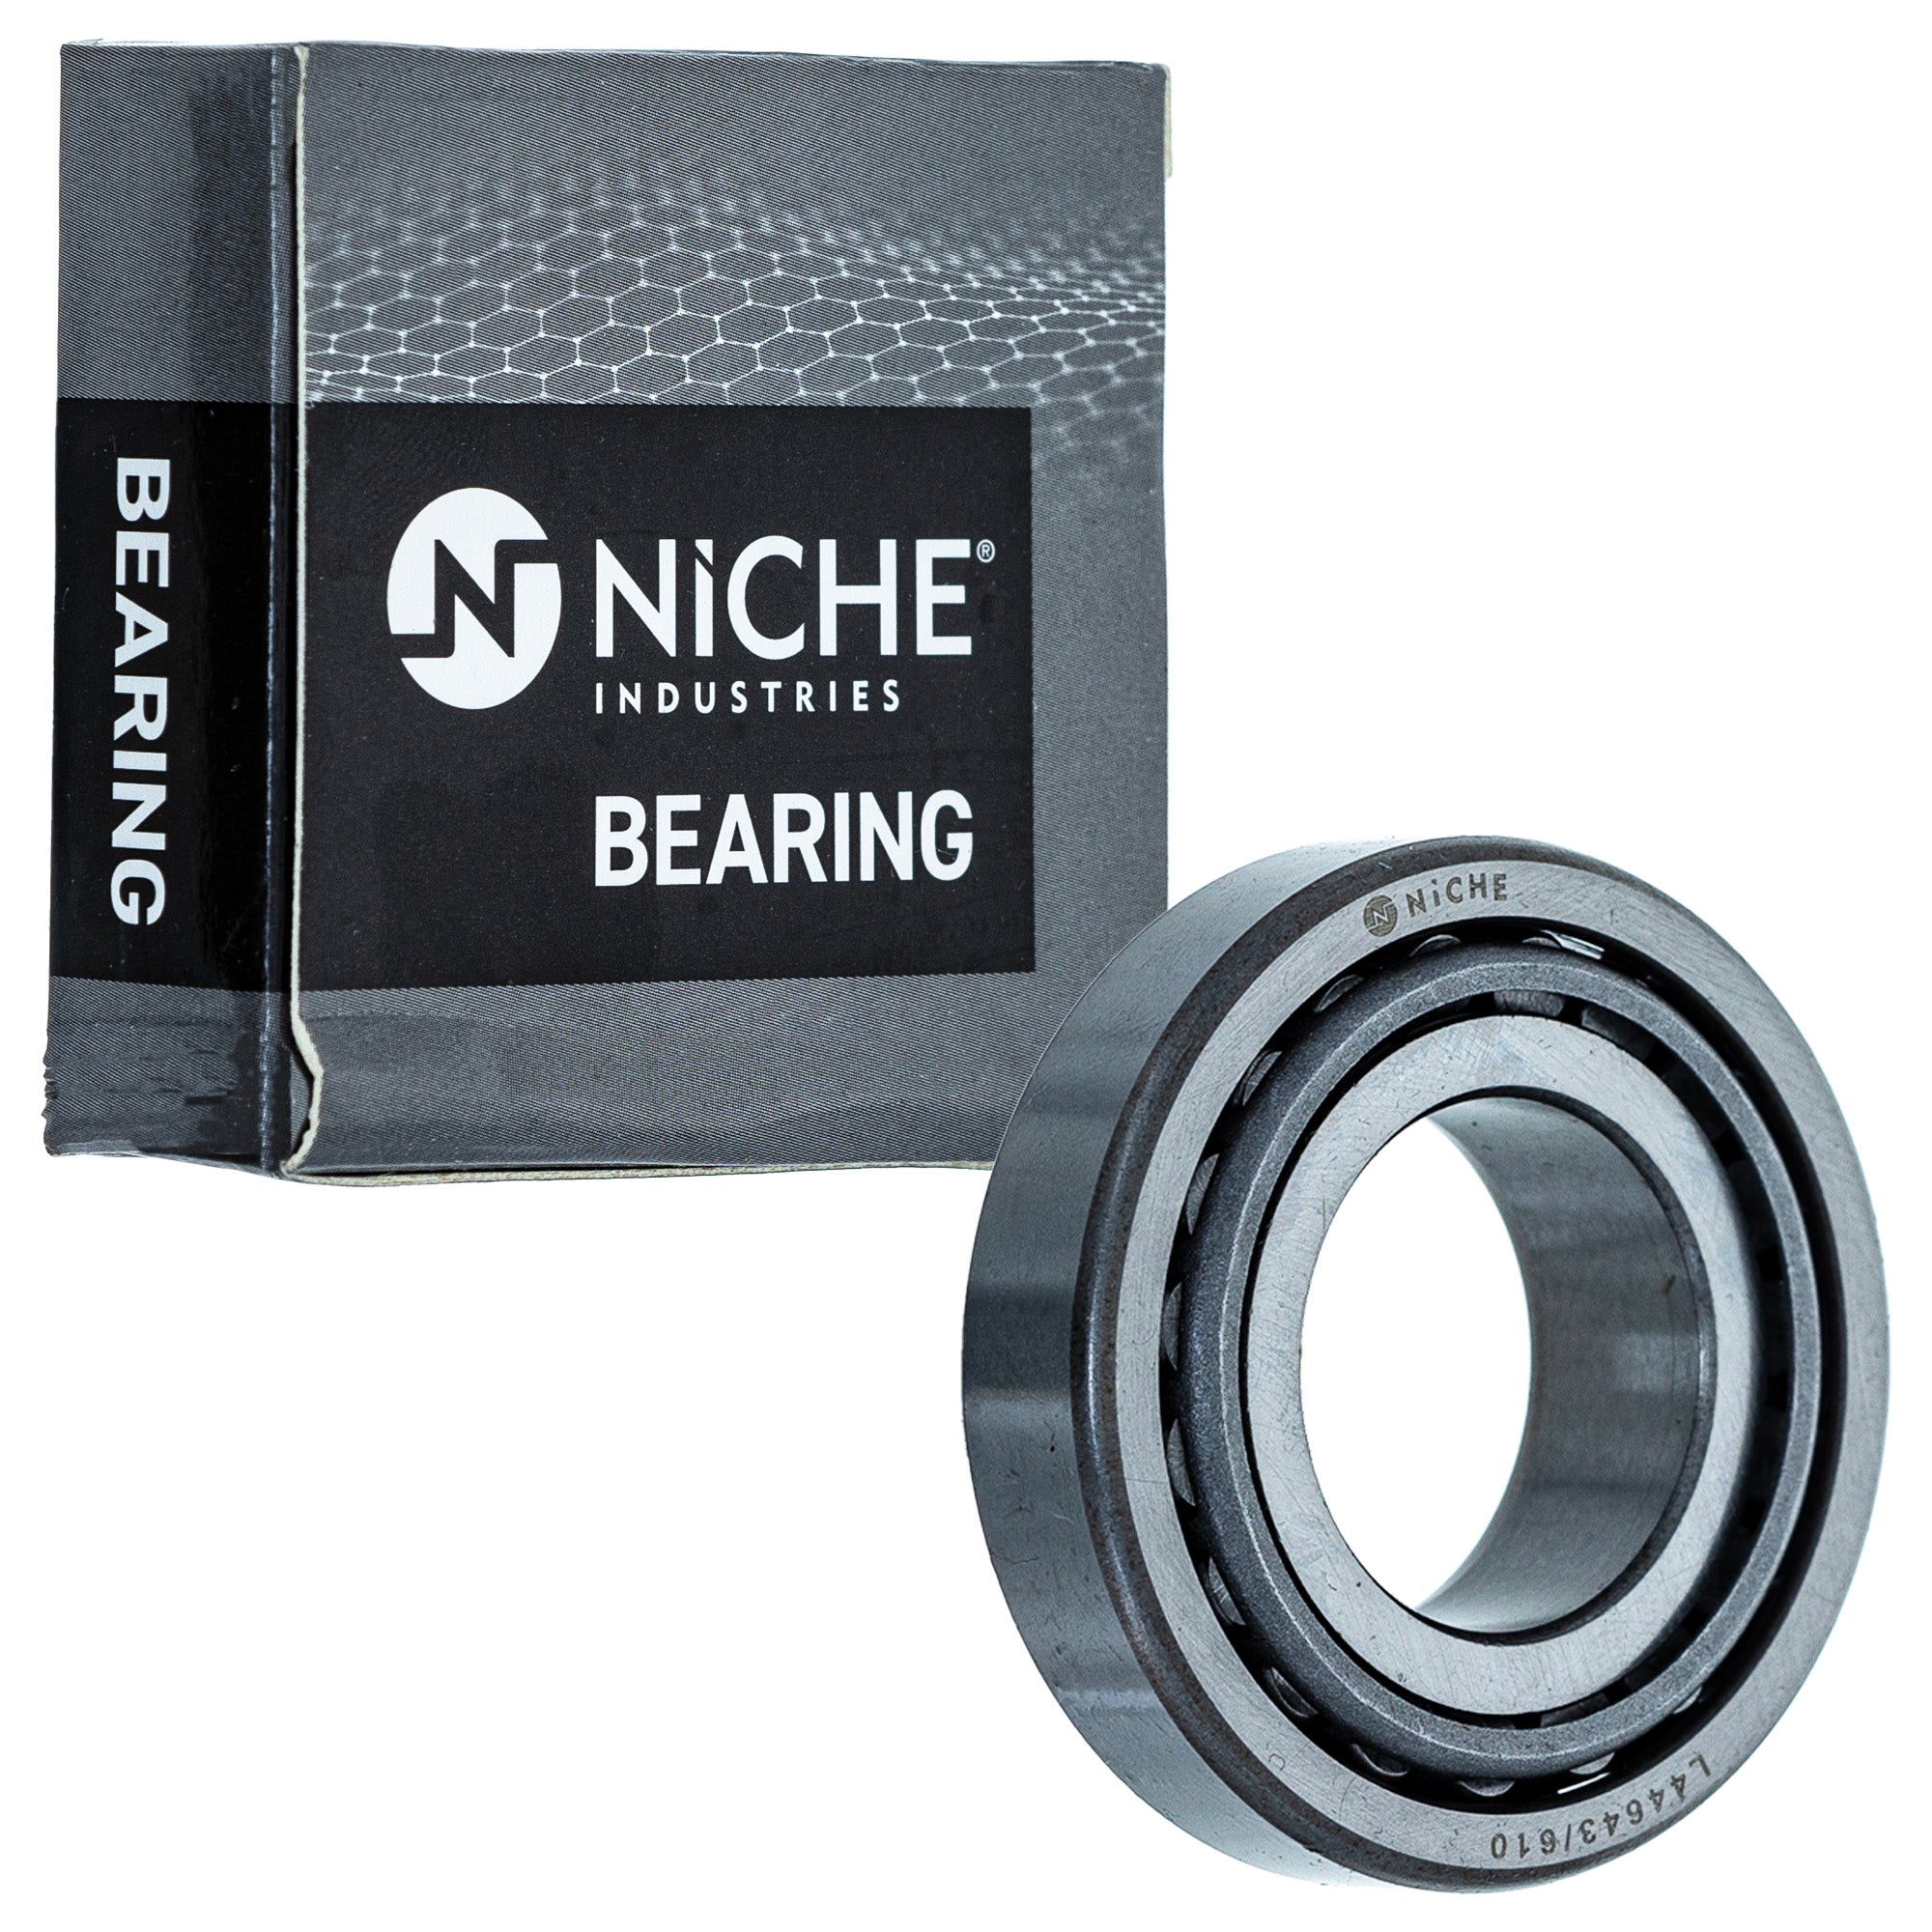 NICHE 519-CBB2240R Bearing 2-Pack for zOTHER Xpress Xplorer Xpedition